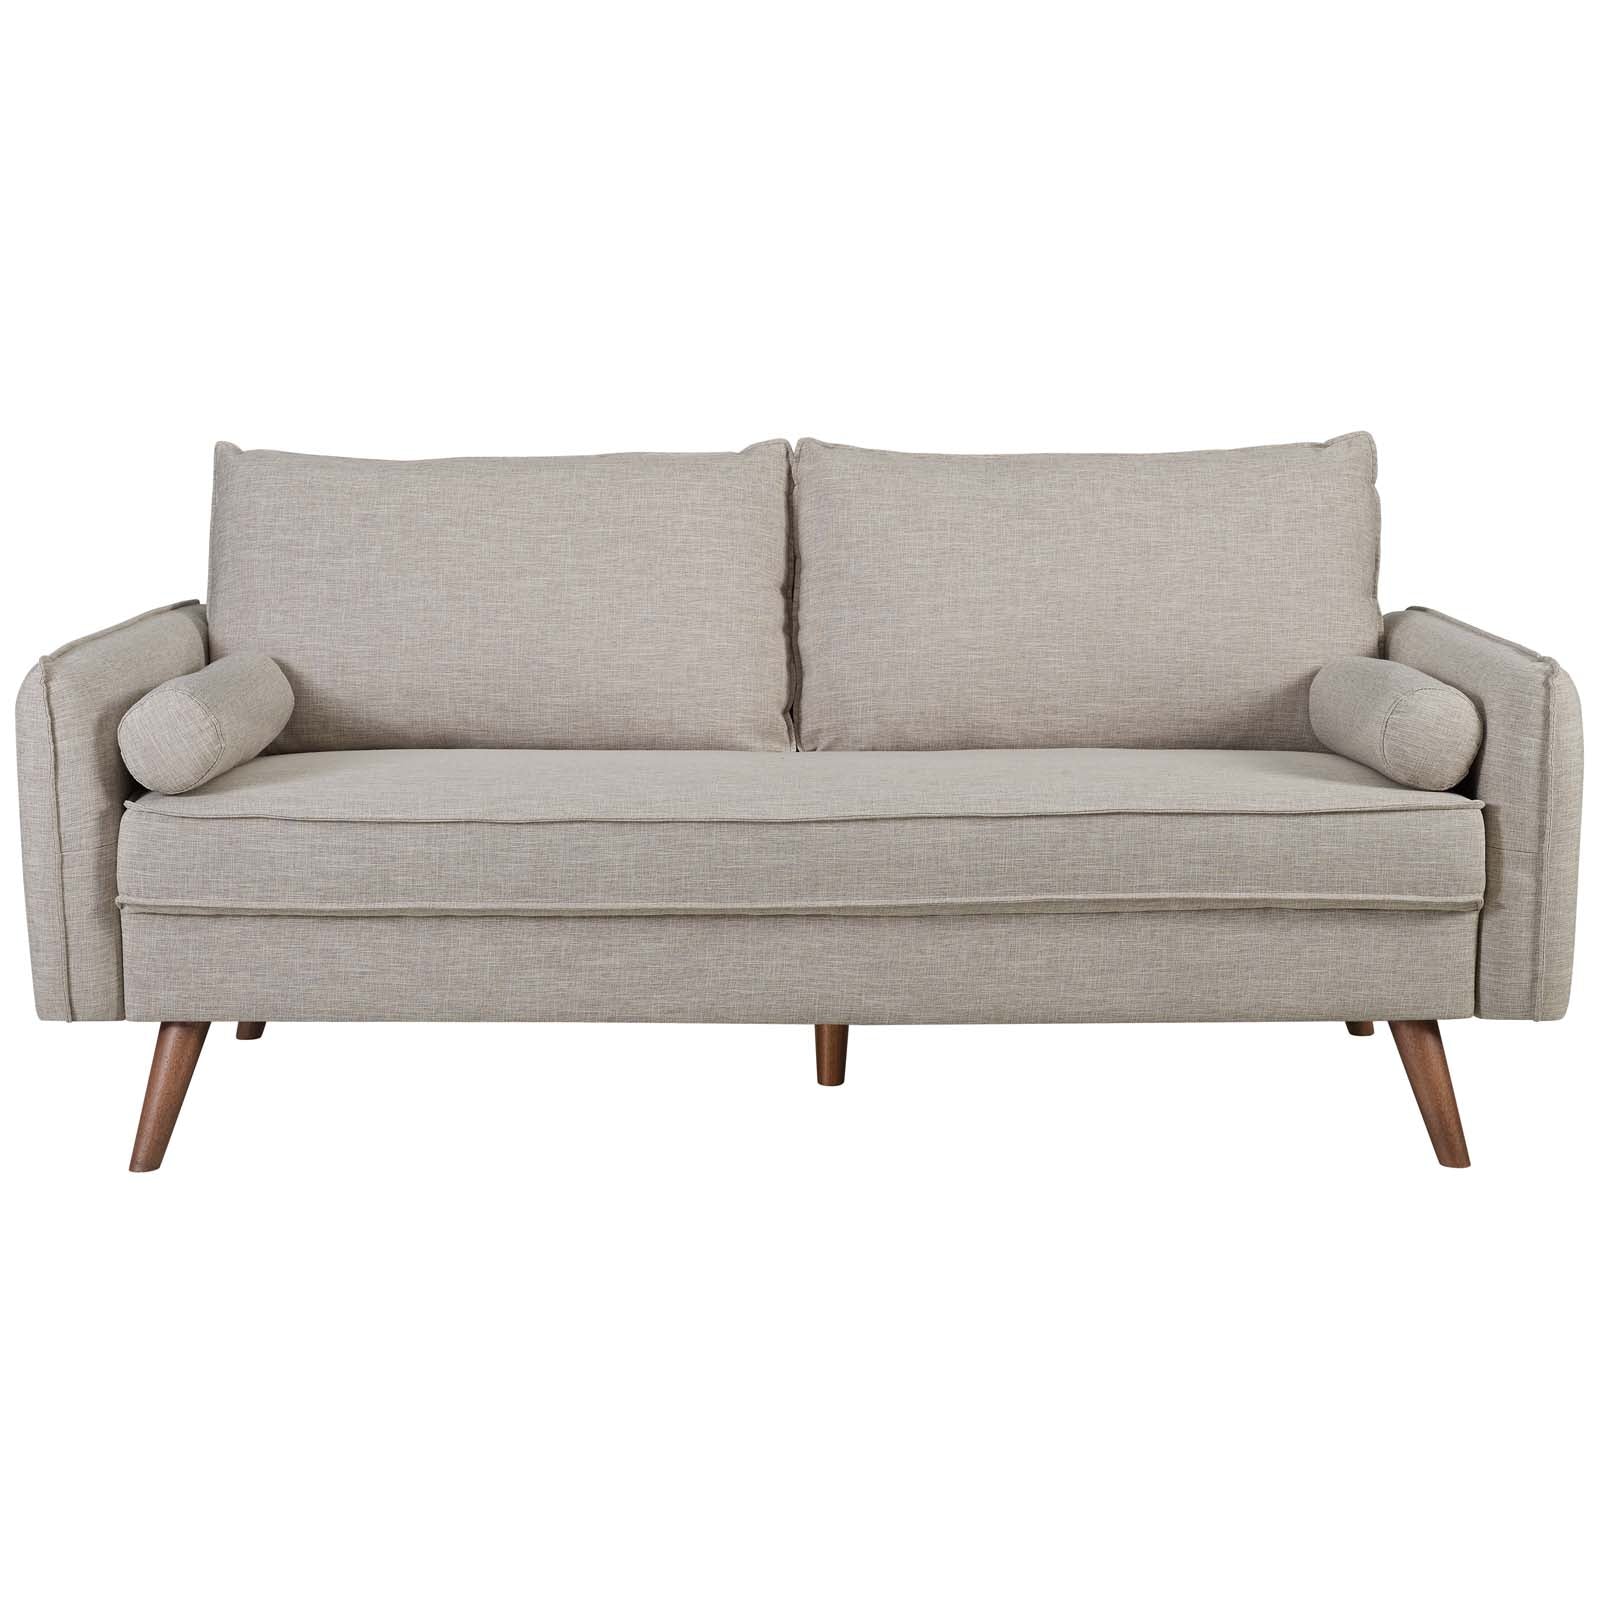 Modway Sofas & Couches - Revive Upholstered Fabric Sofa Beige